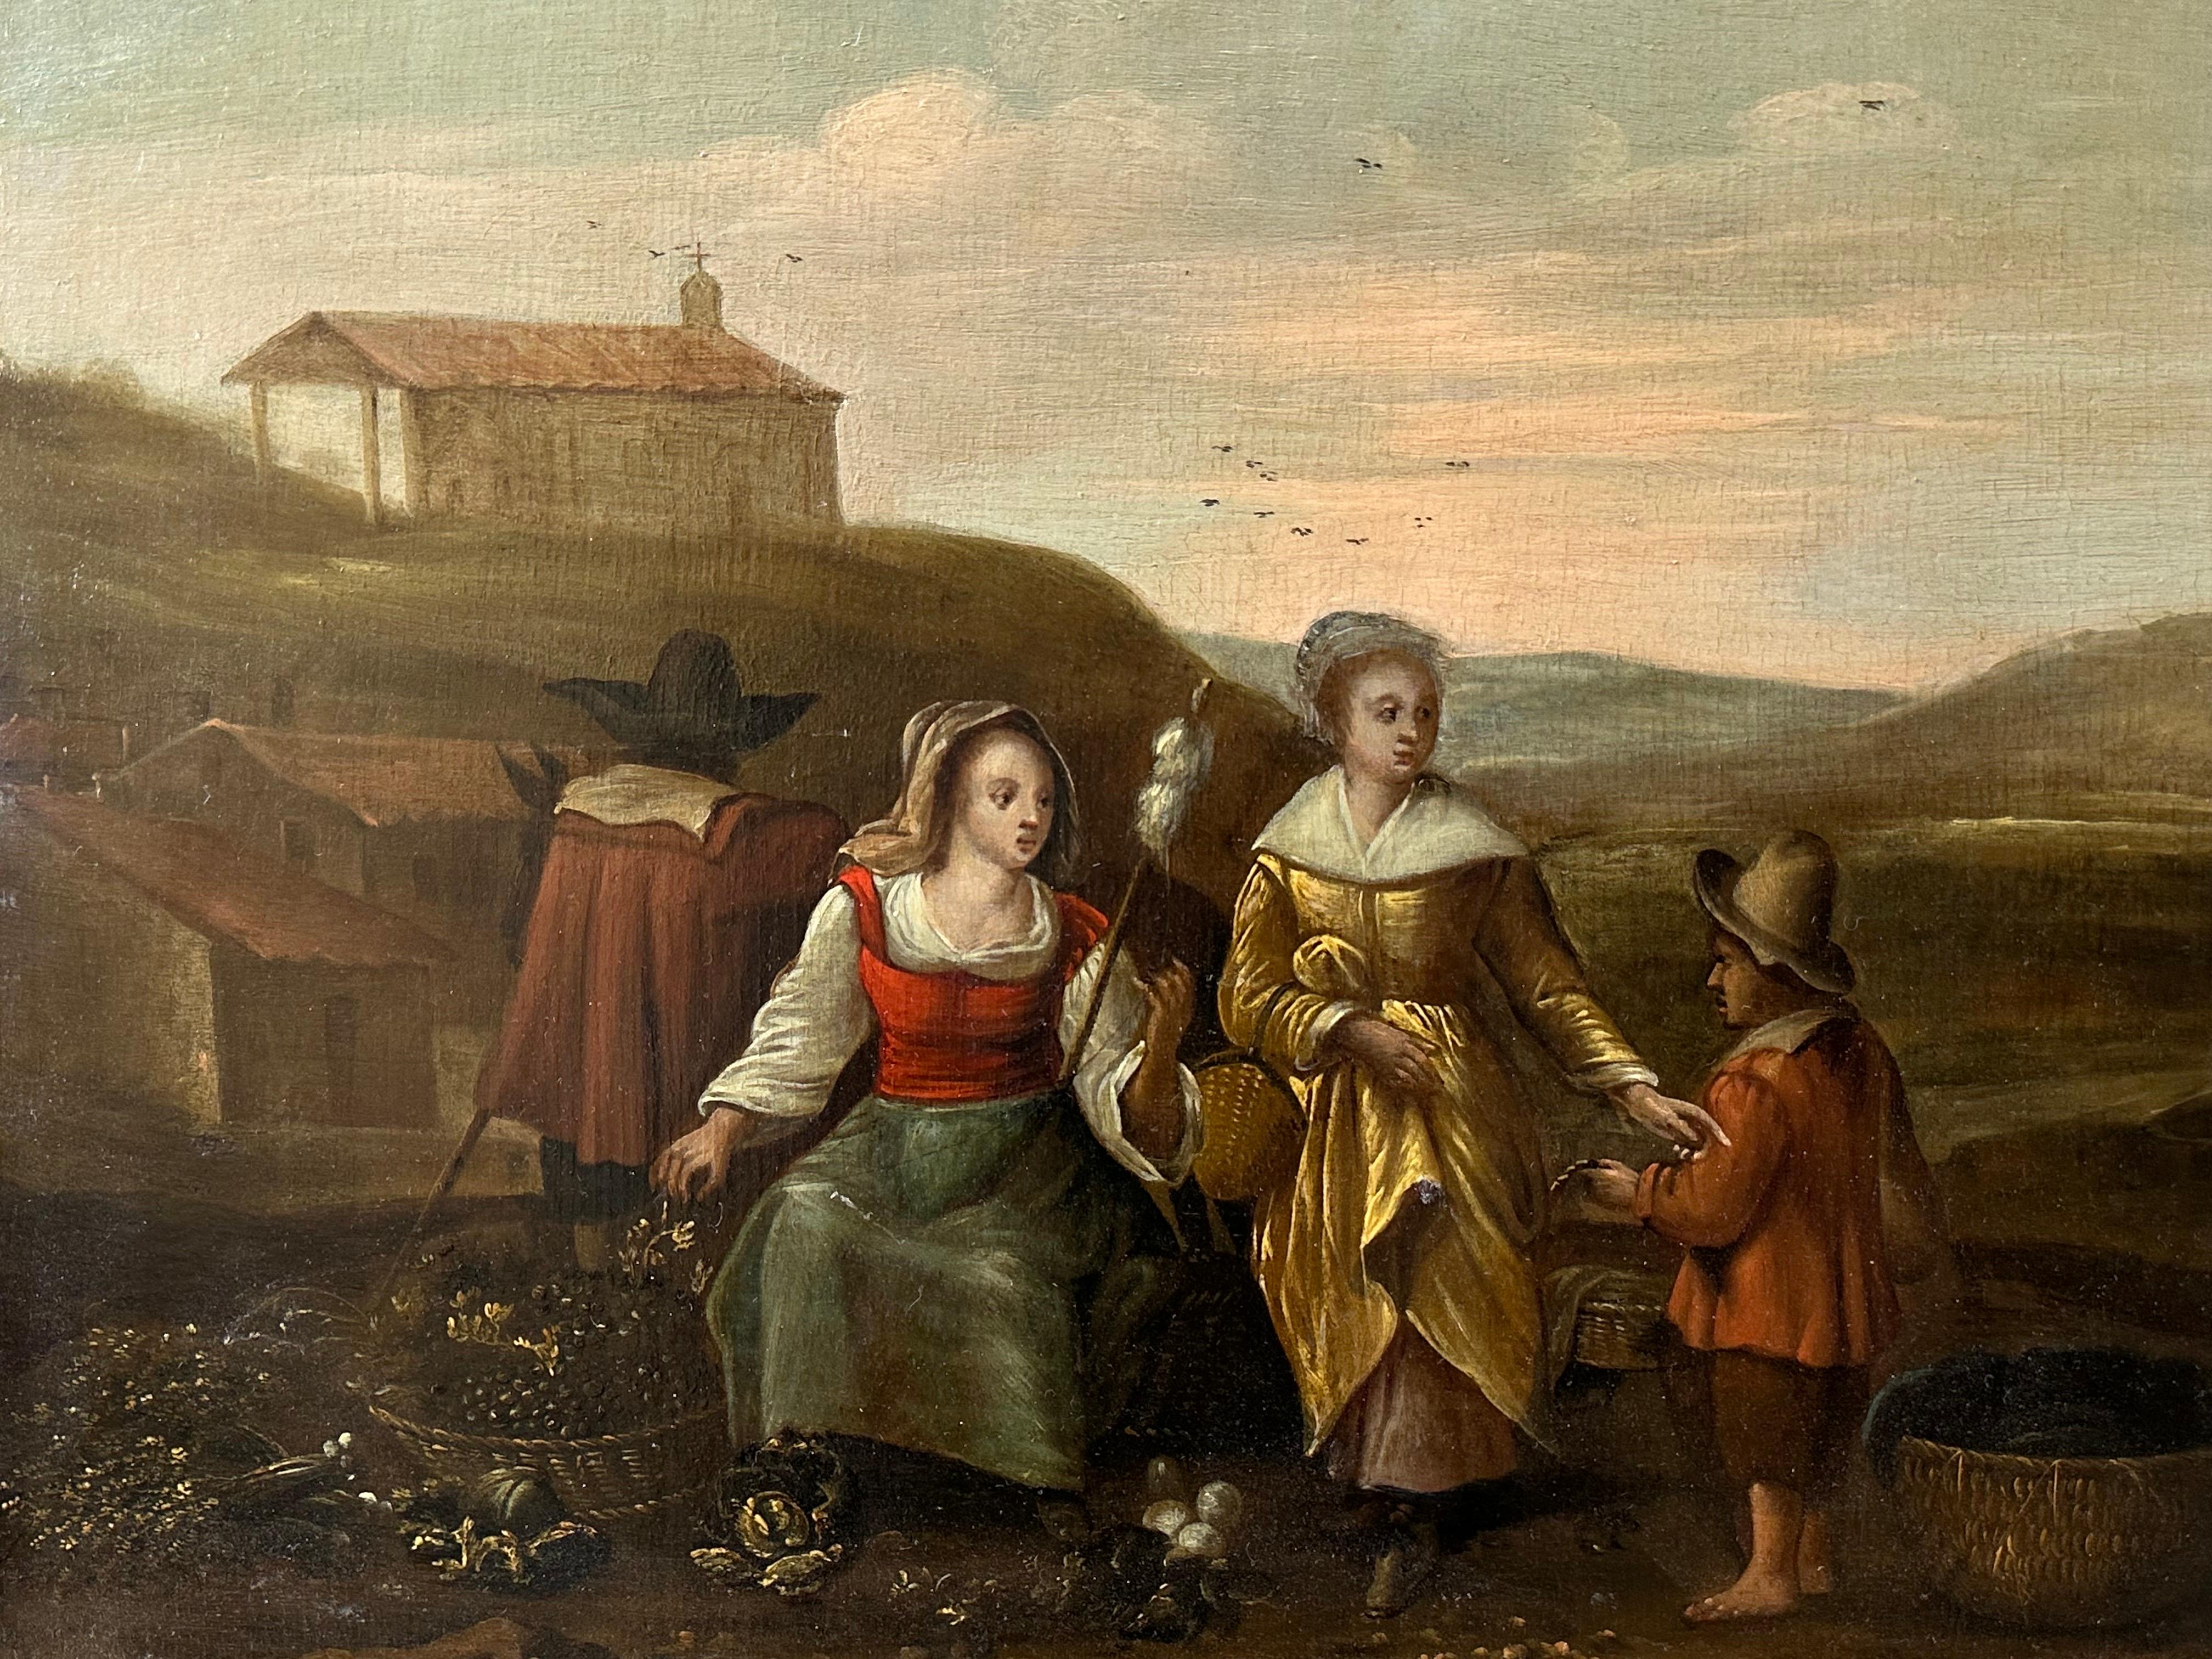 The Grape Harvest
Flemish/ Dutch School, 17th century
oil on wood panel
panel: 13 x 16 inches
provenance: private collection, Belgium
condition: very good and sound condition